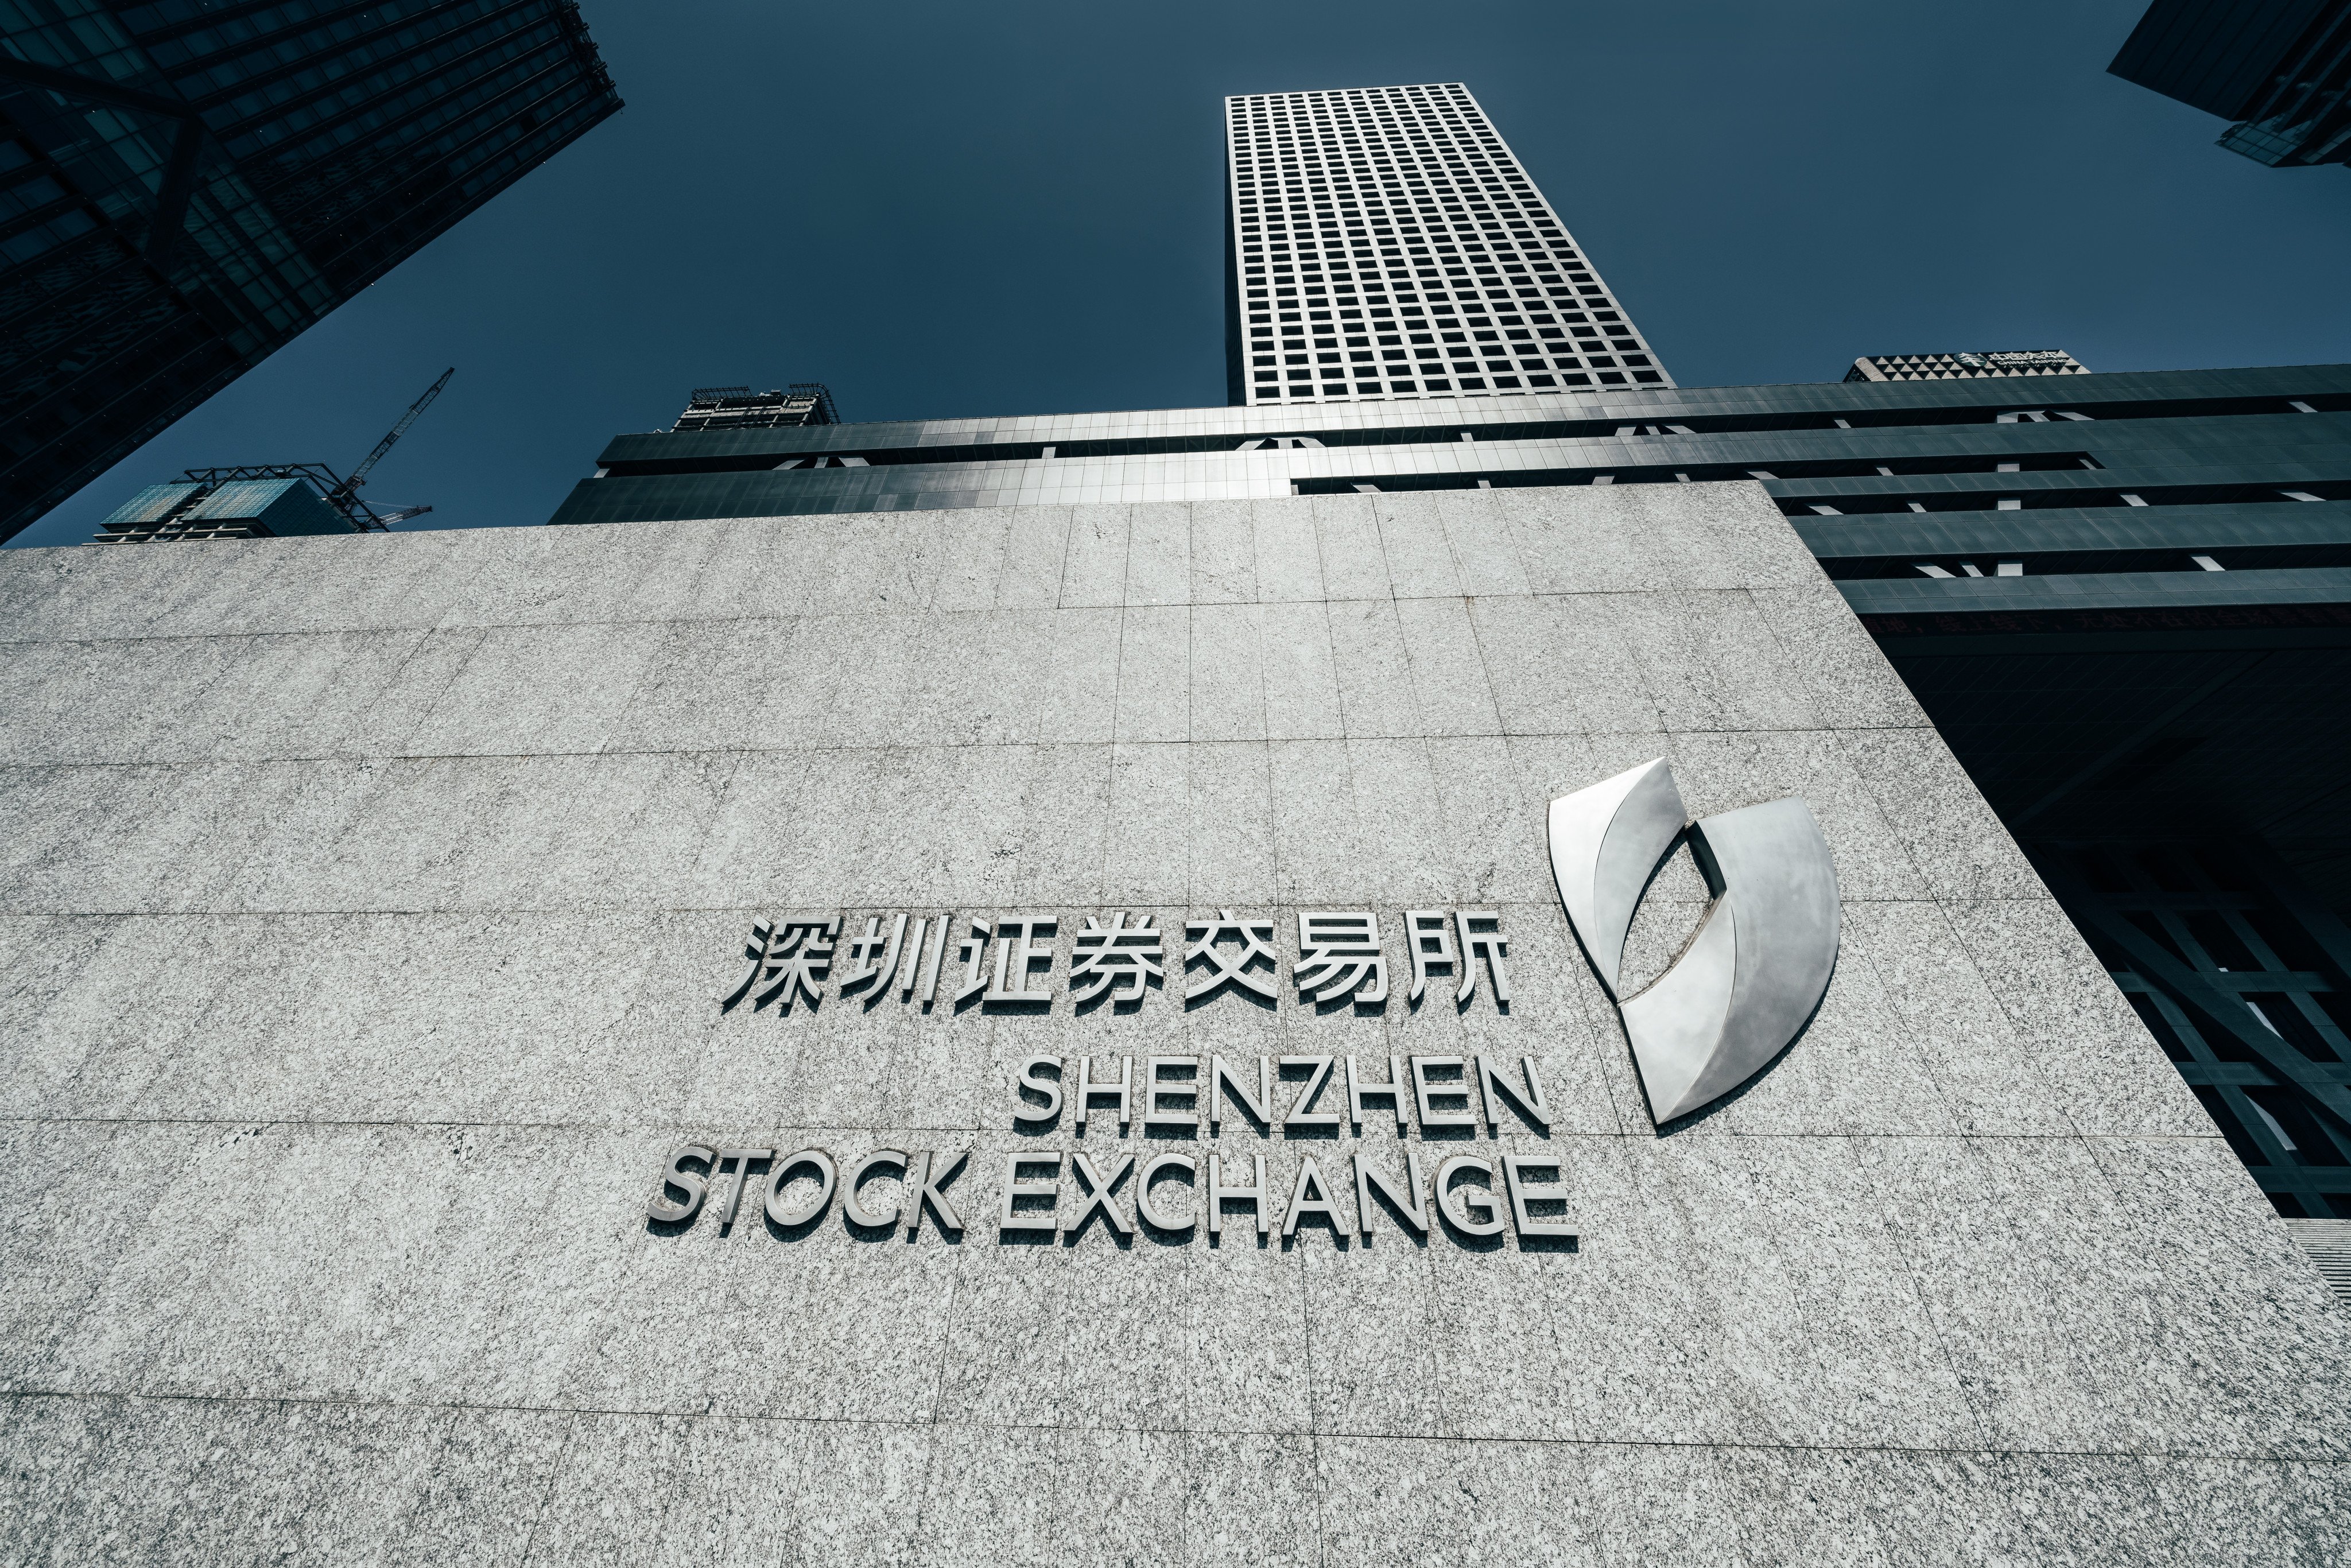 Shenzhen stock exchange in financial district of Shenzhen, China. Shenzhen stock exchange is one of the three biggest stock markets in China. Photo: Shutterstock
